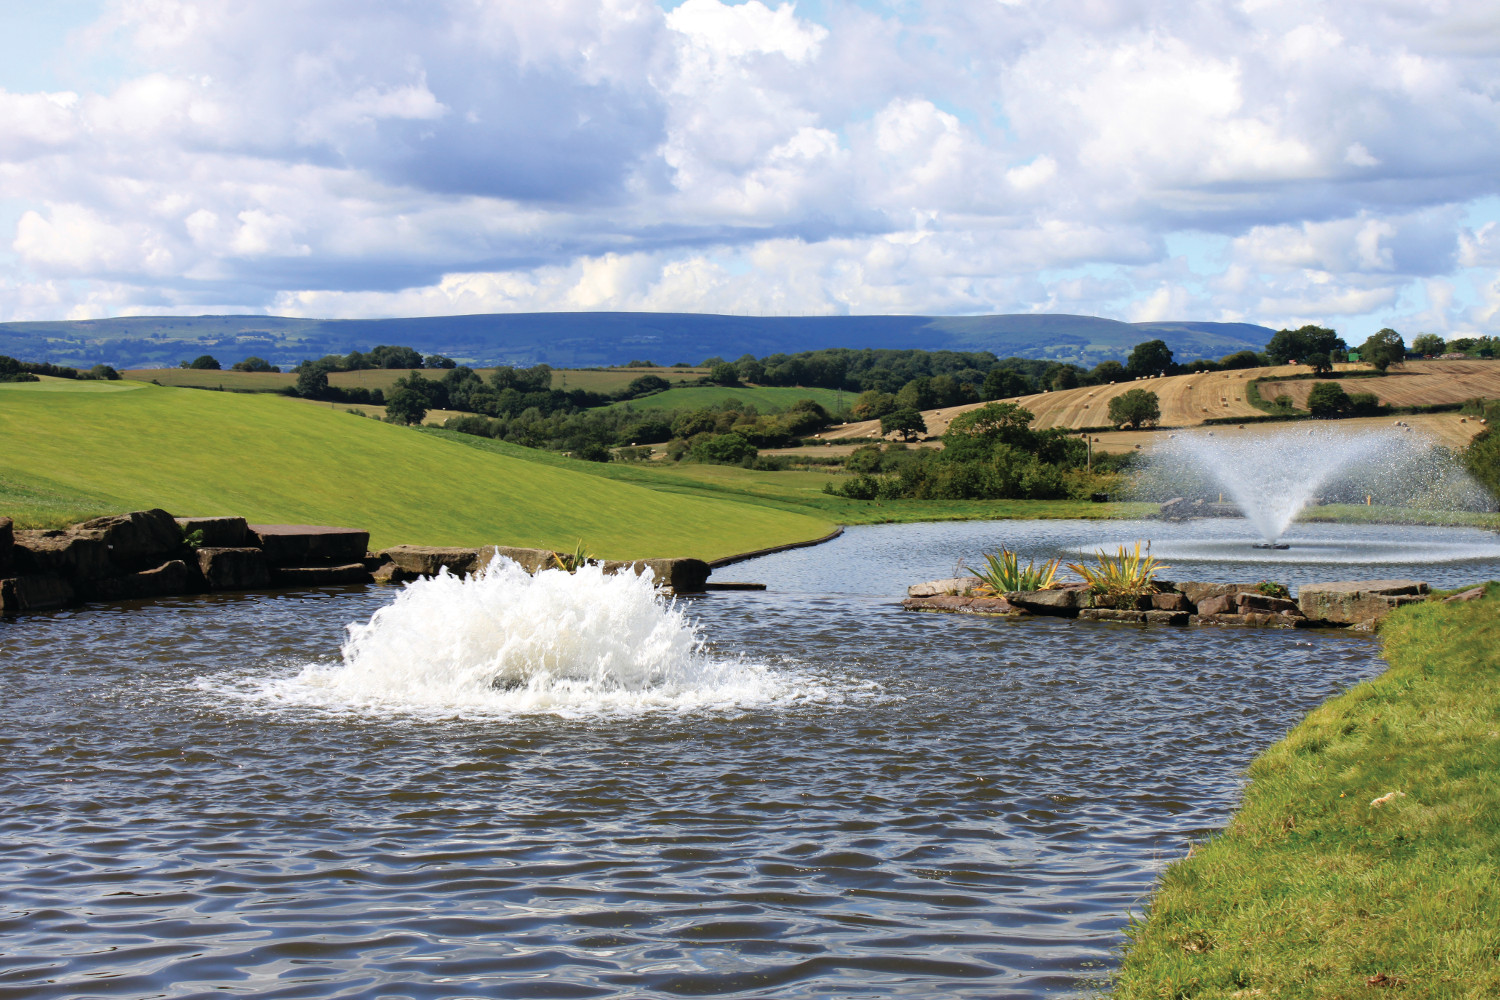 Otterbine Aerating Fountains at a gold course